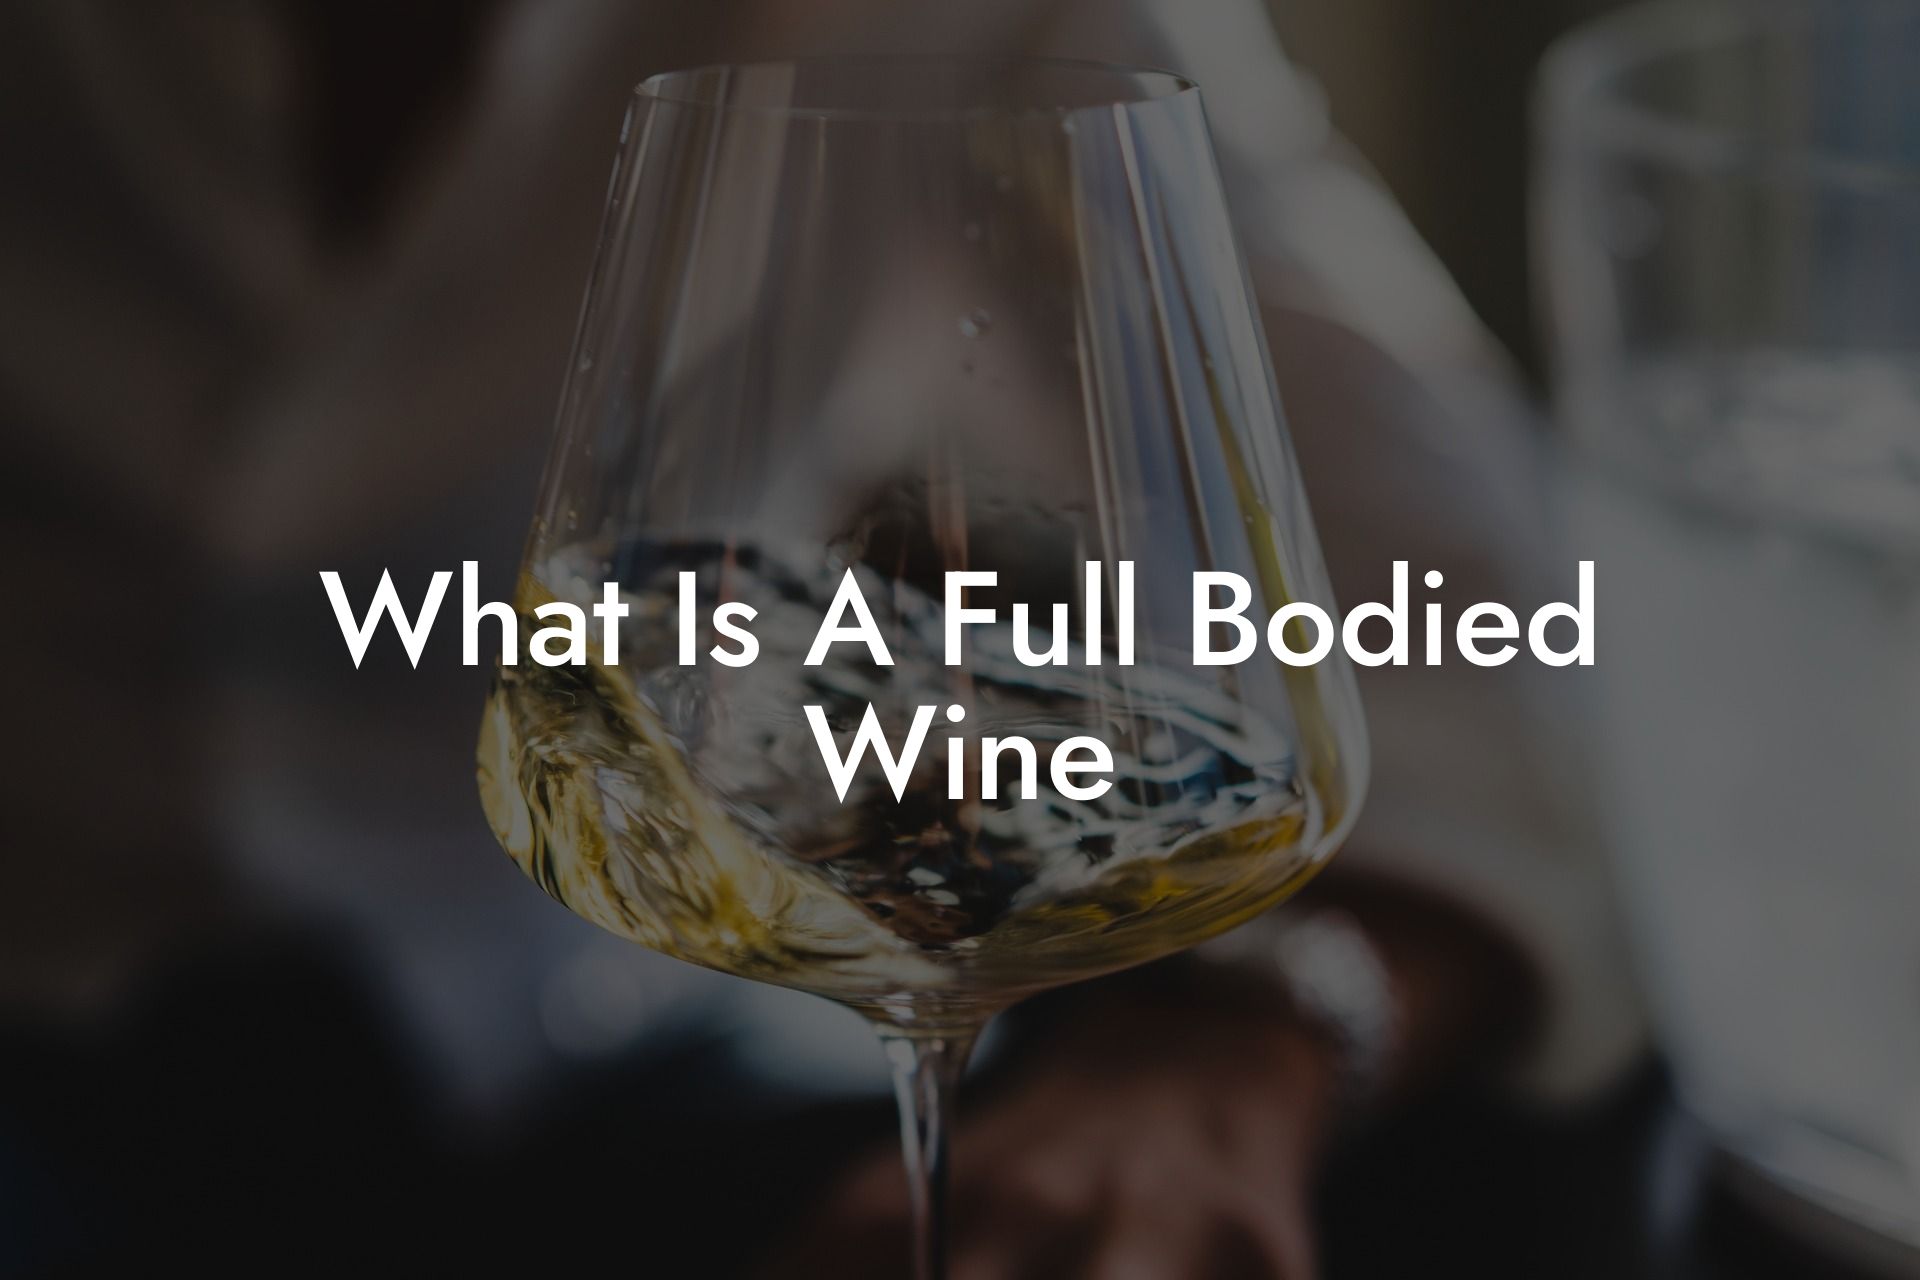 What Is A Full Bodied Wine